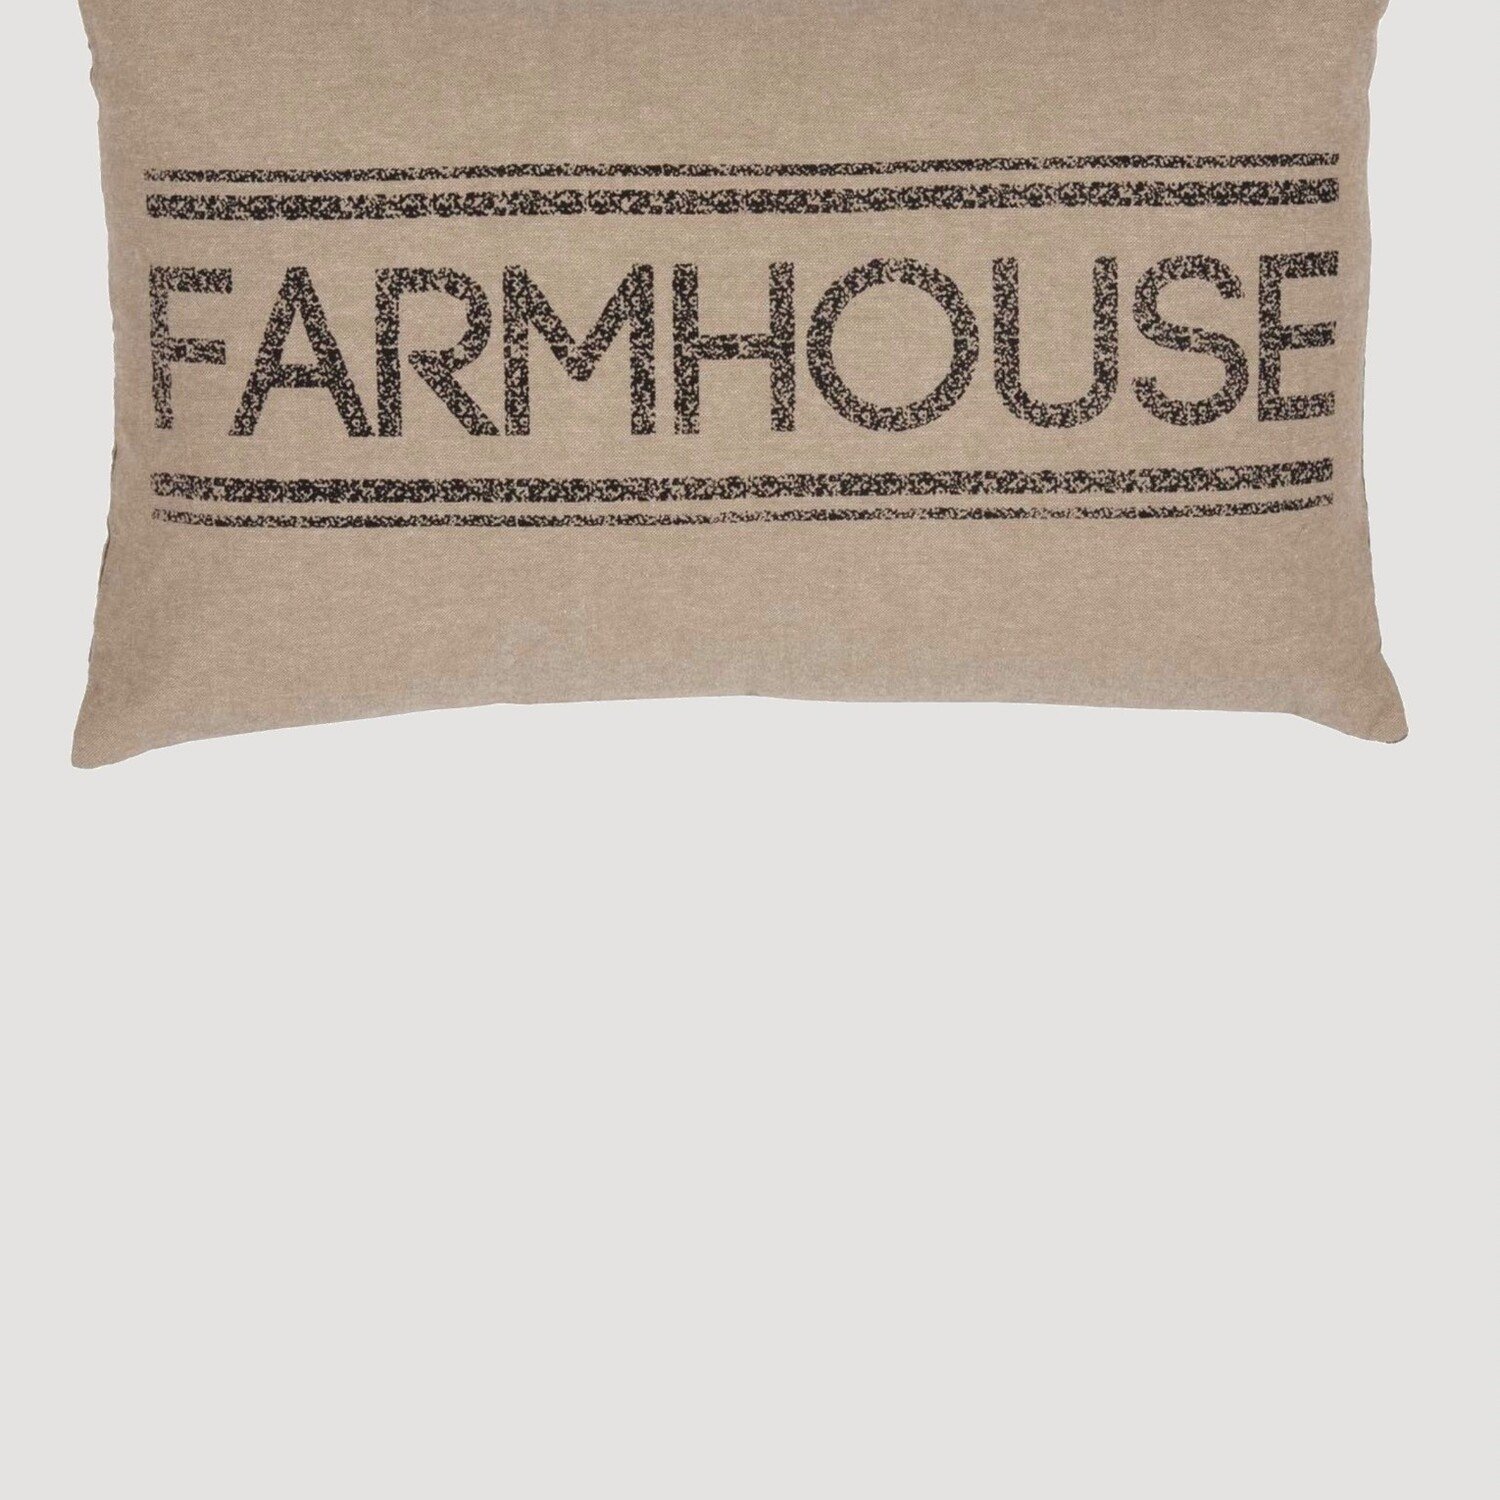 VHC Brands Sawyer Mill Charcoal Pillow, 18x18, Corn Feed